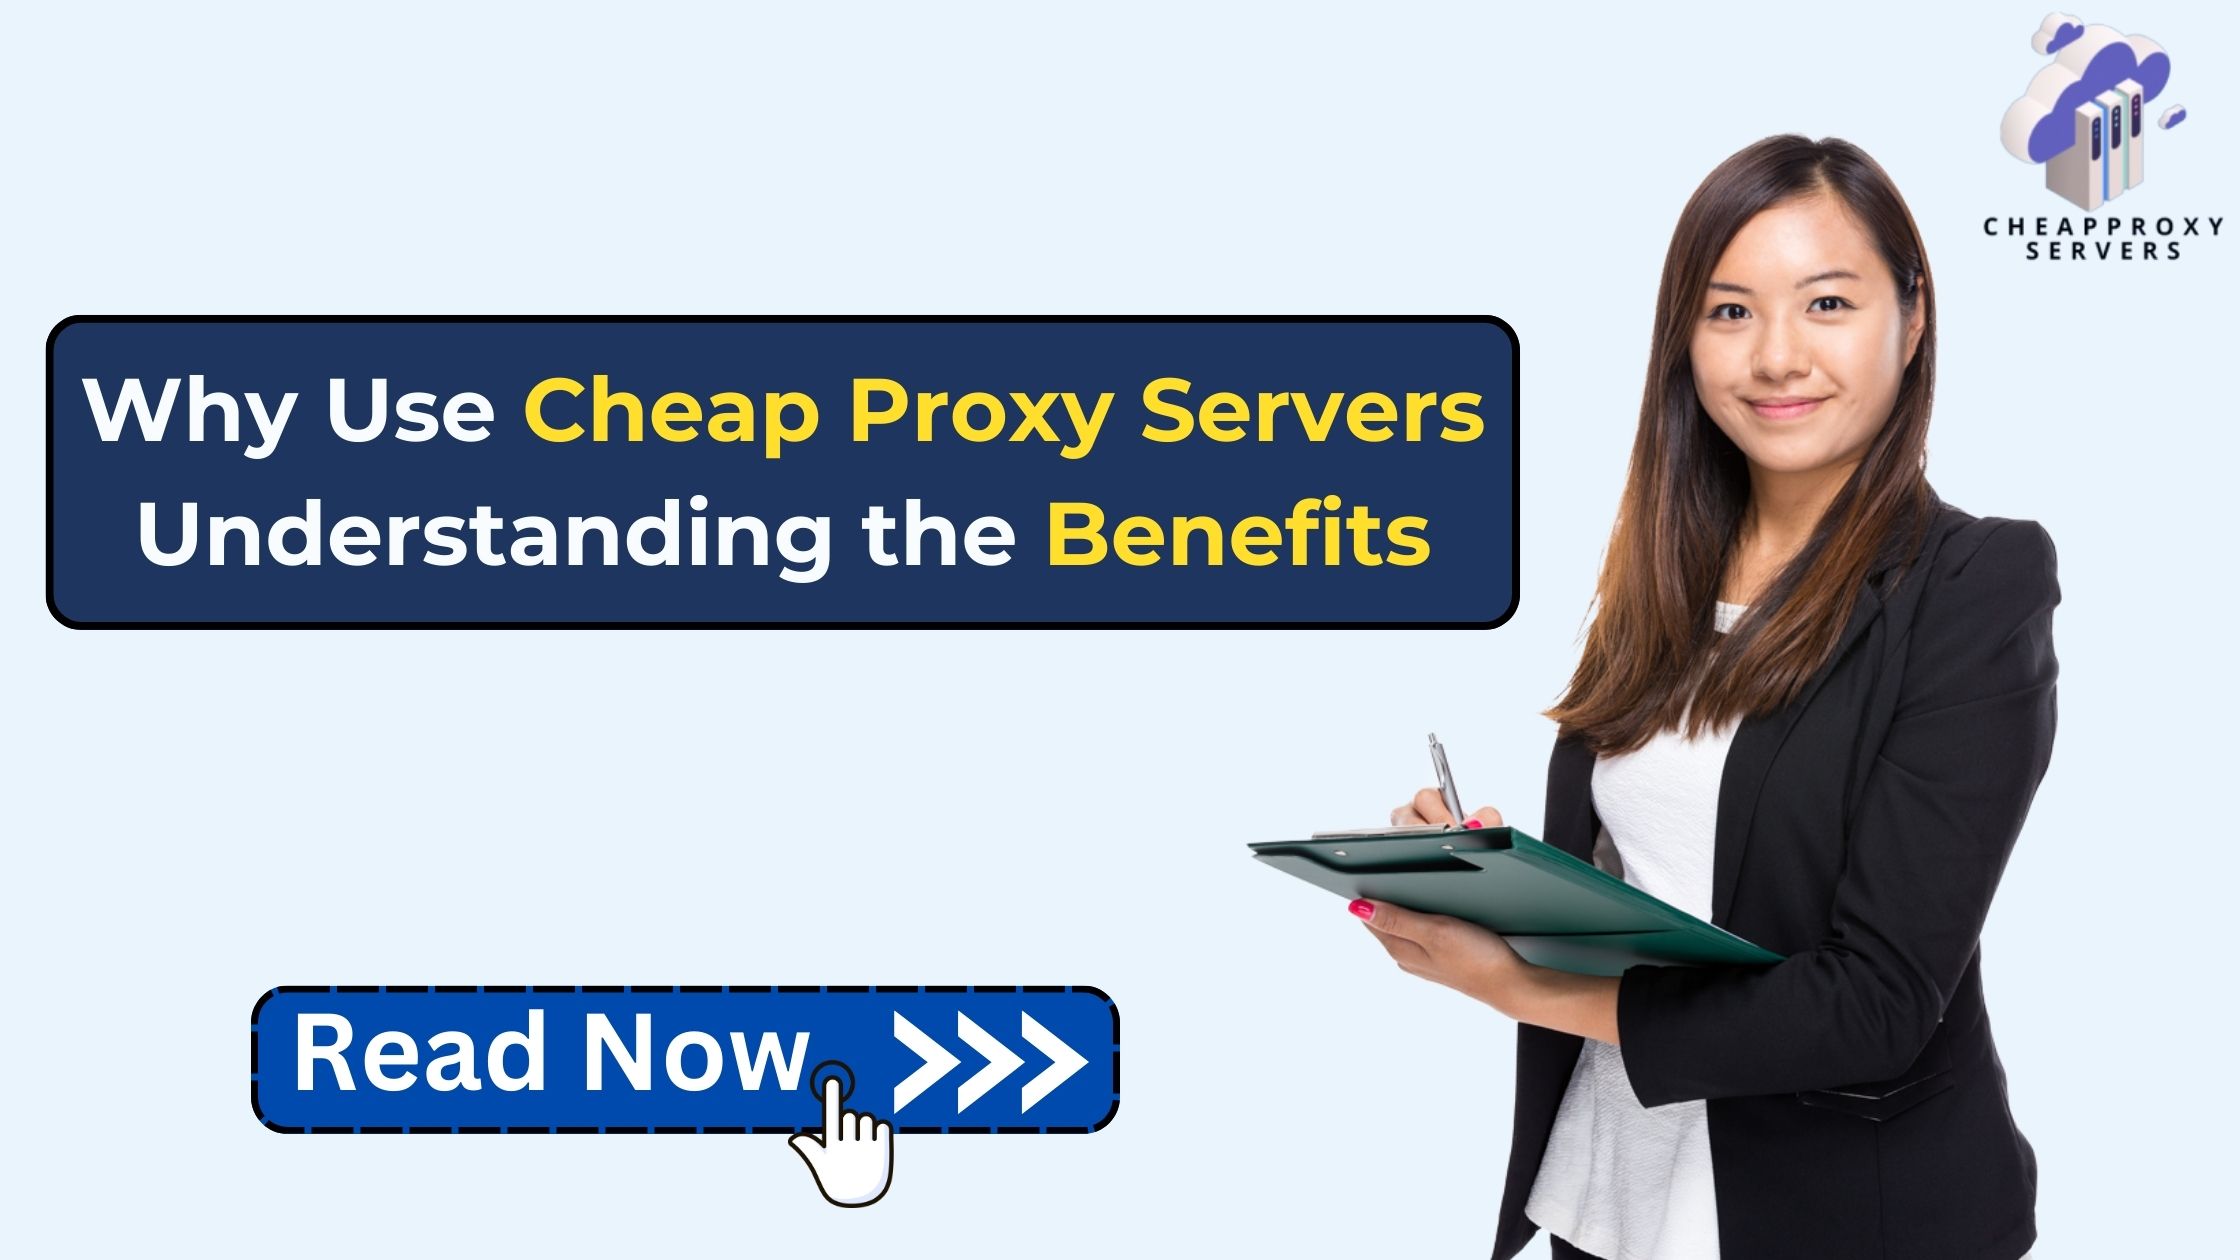 Proxy servers act as intermediaries between a user's computer and the internet.